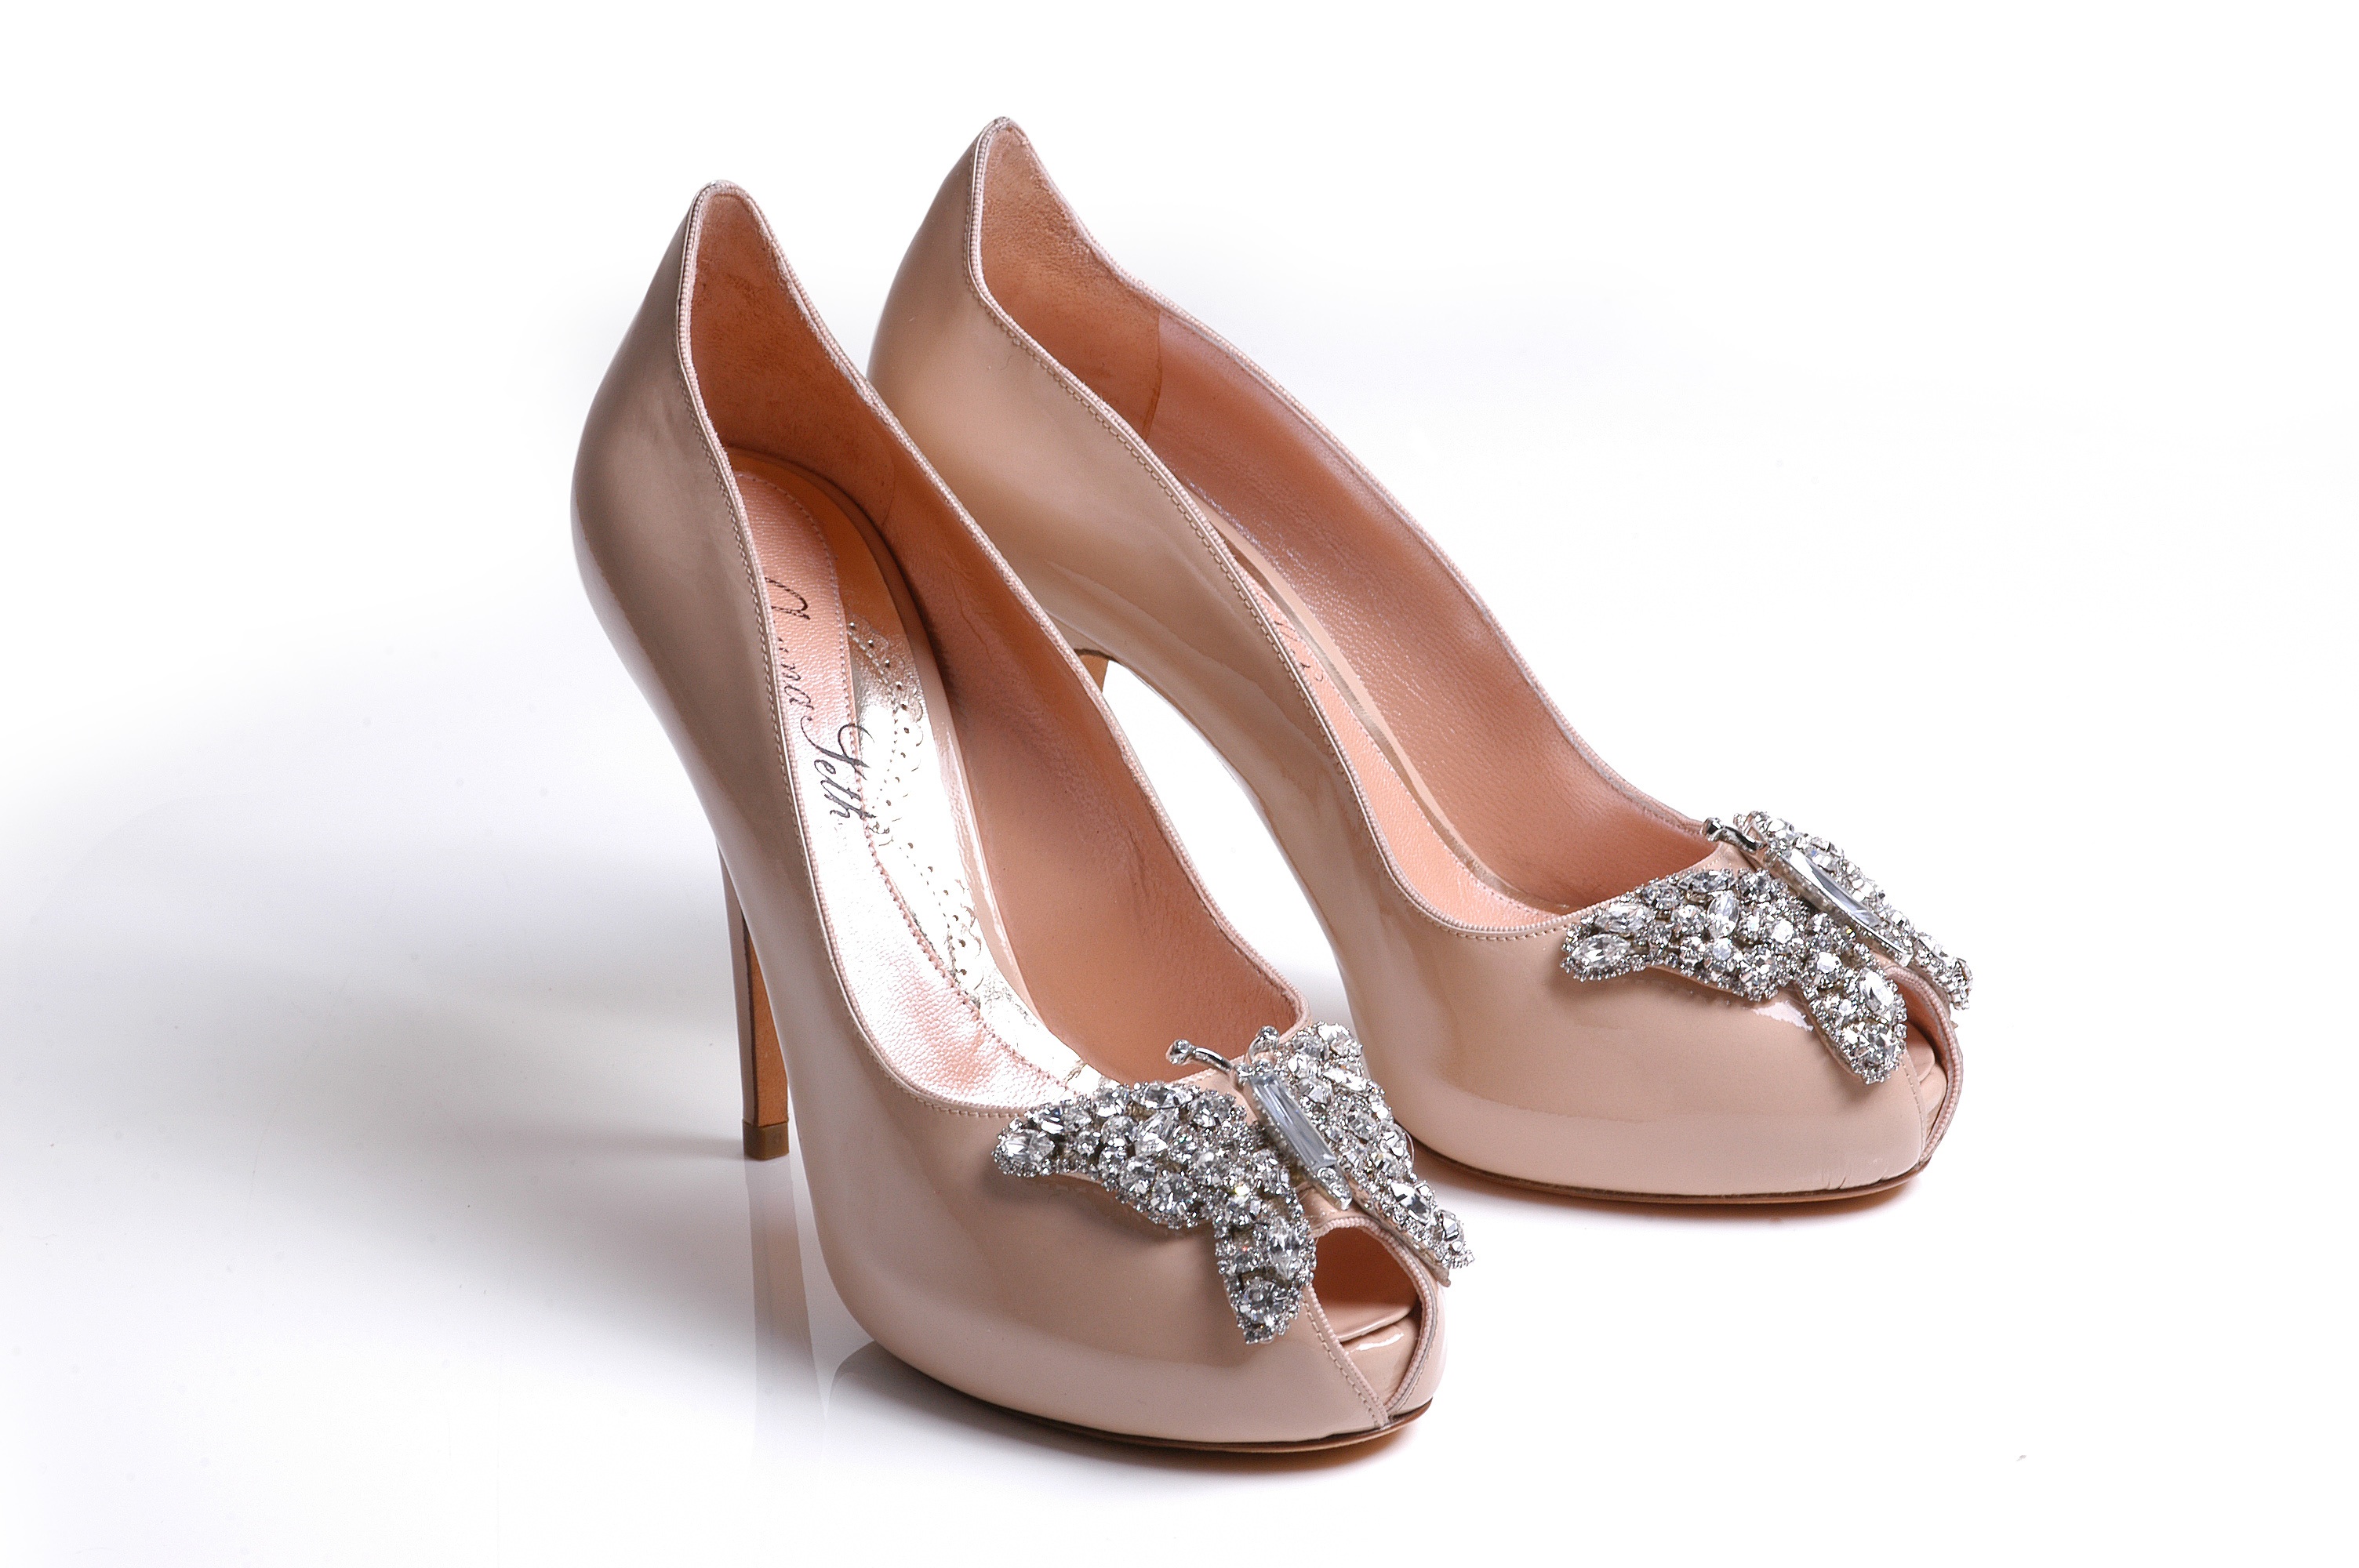 Nude patent farfalla shoes pair view